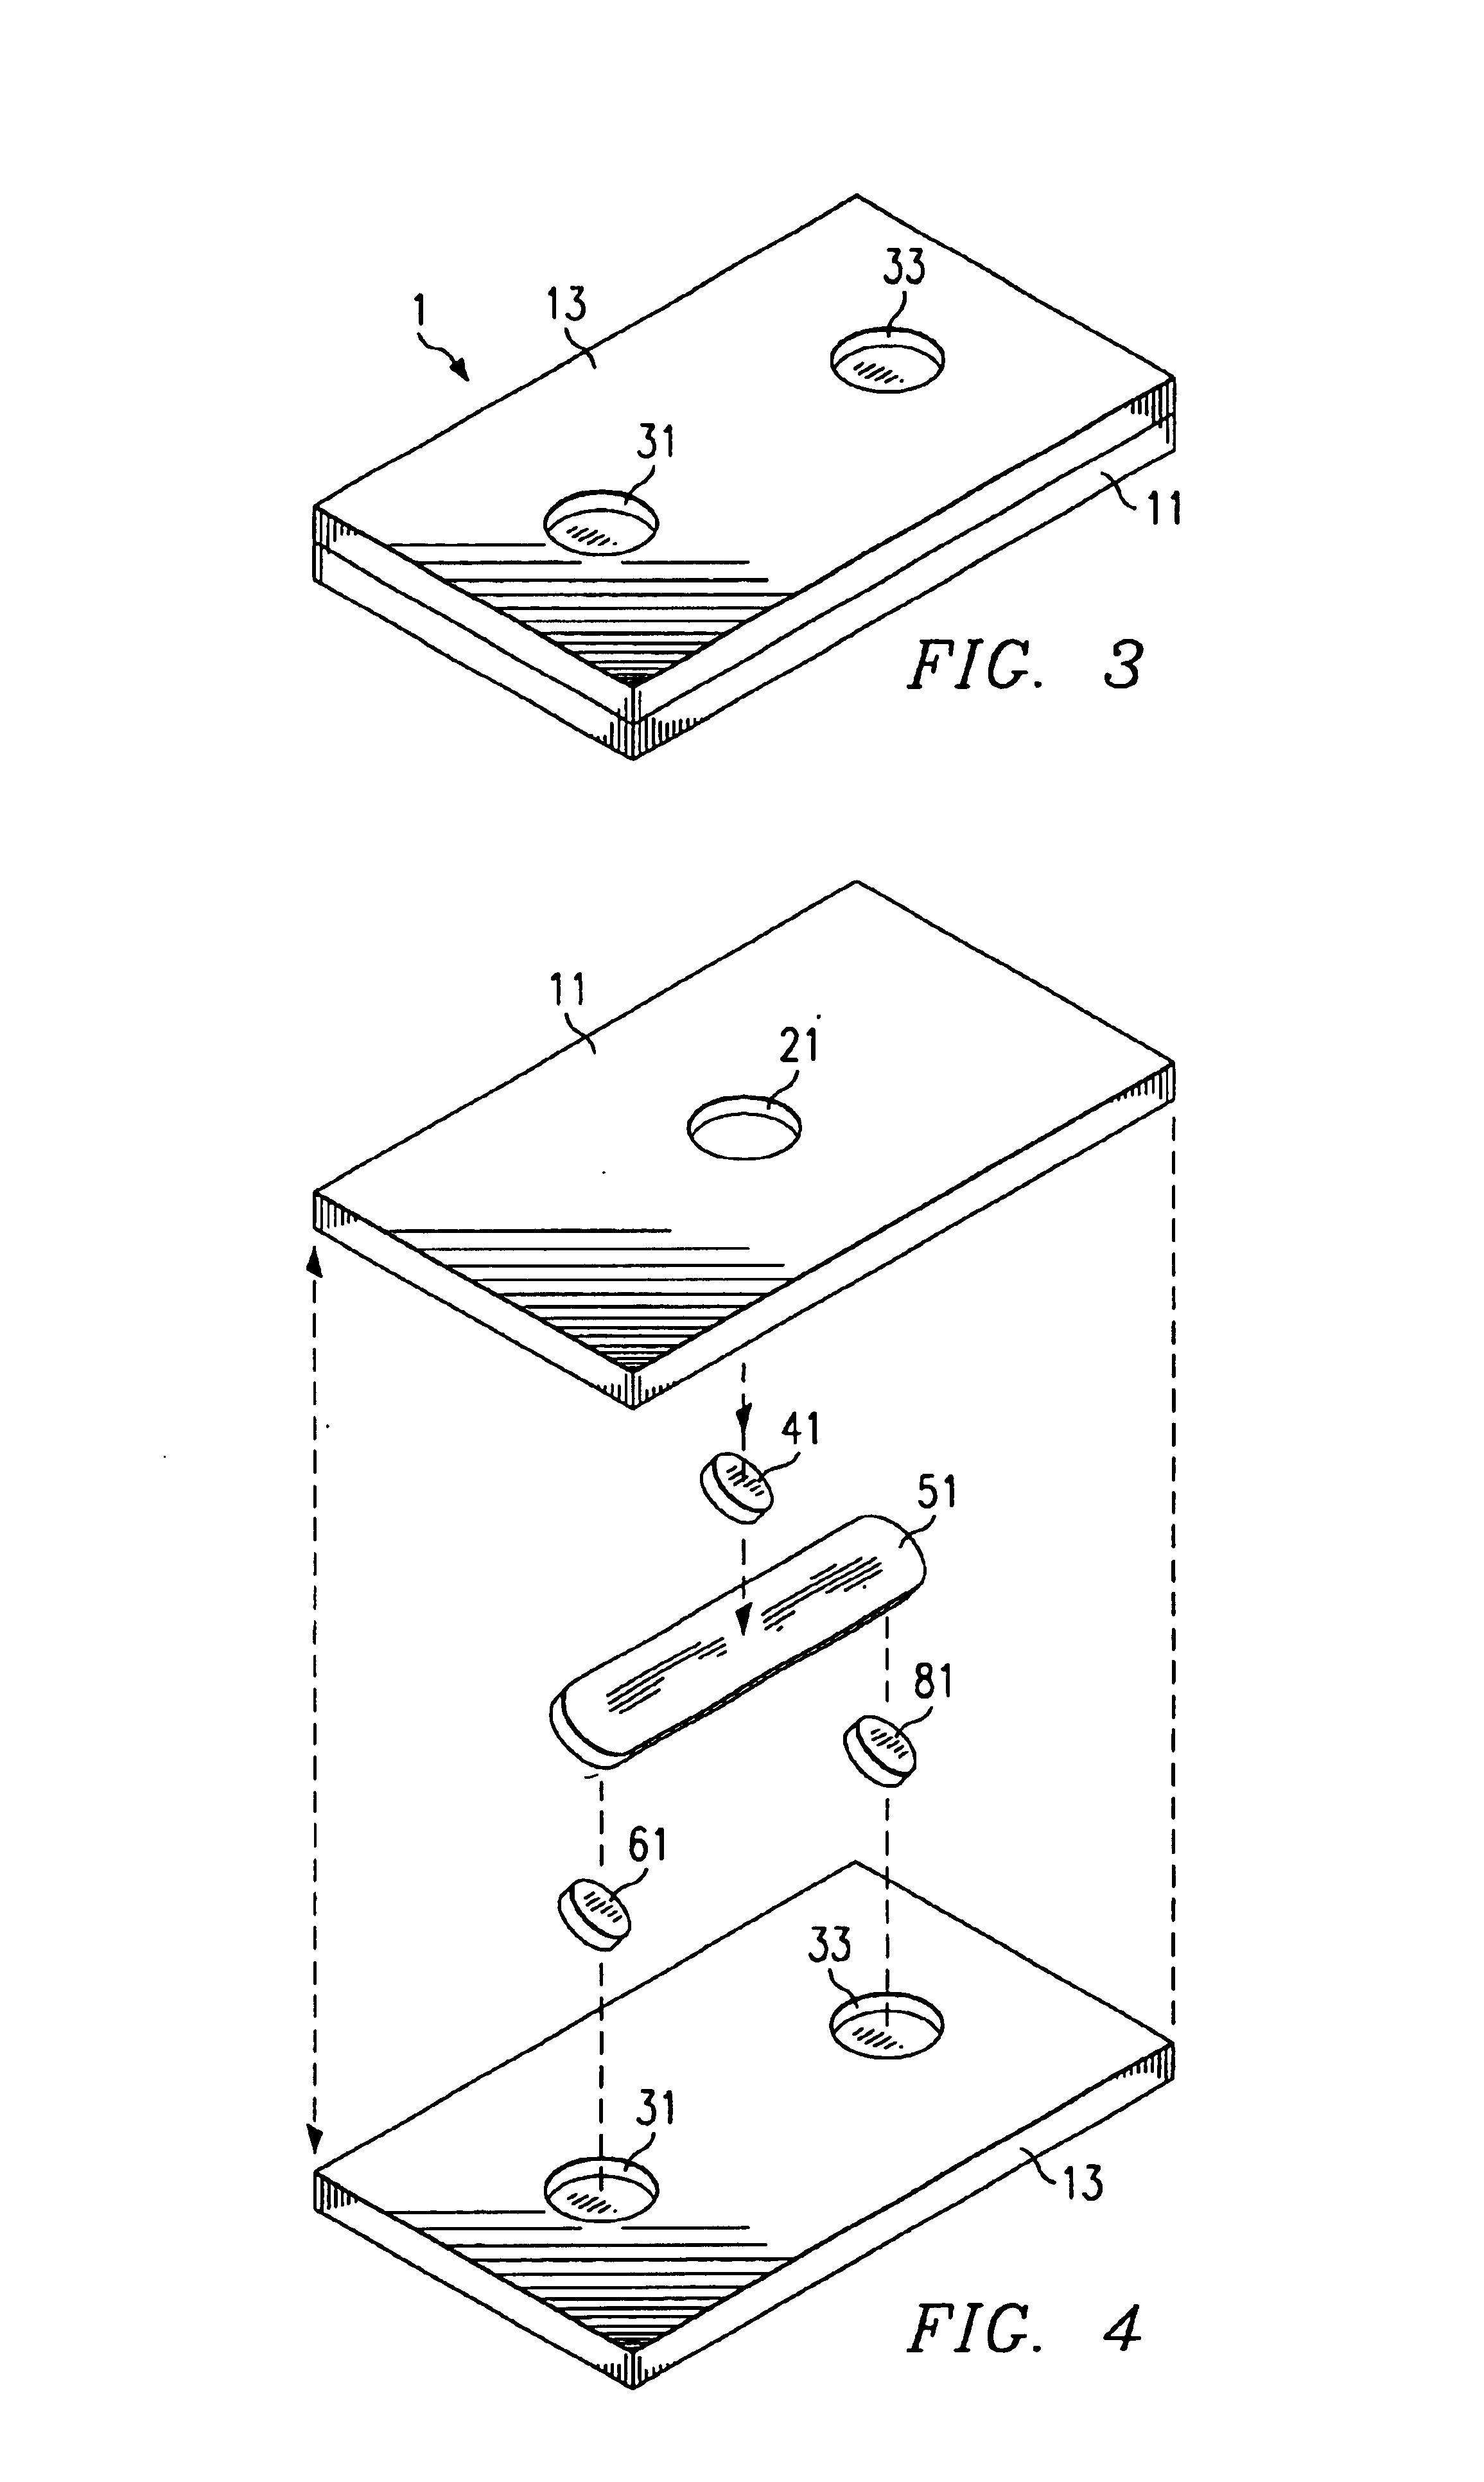 Method, system, and apparatus for measurement and recording of blood chemistry and other physiological measurements